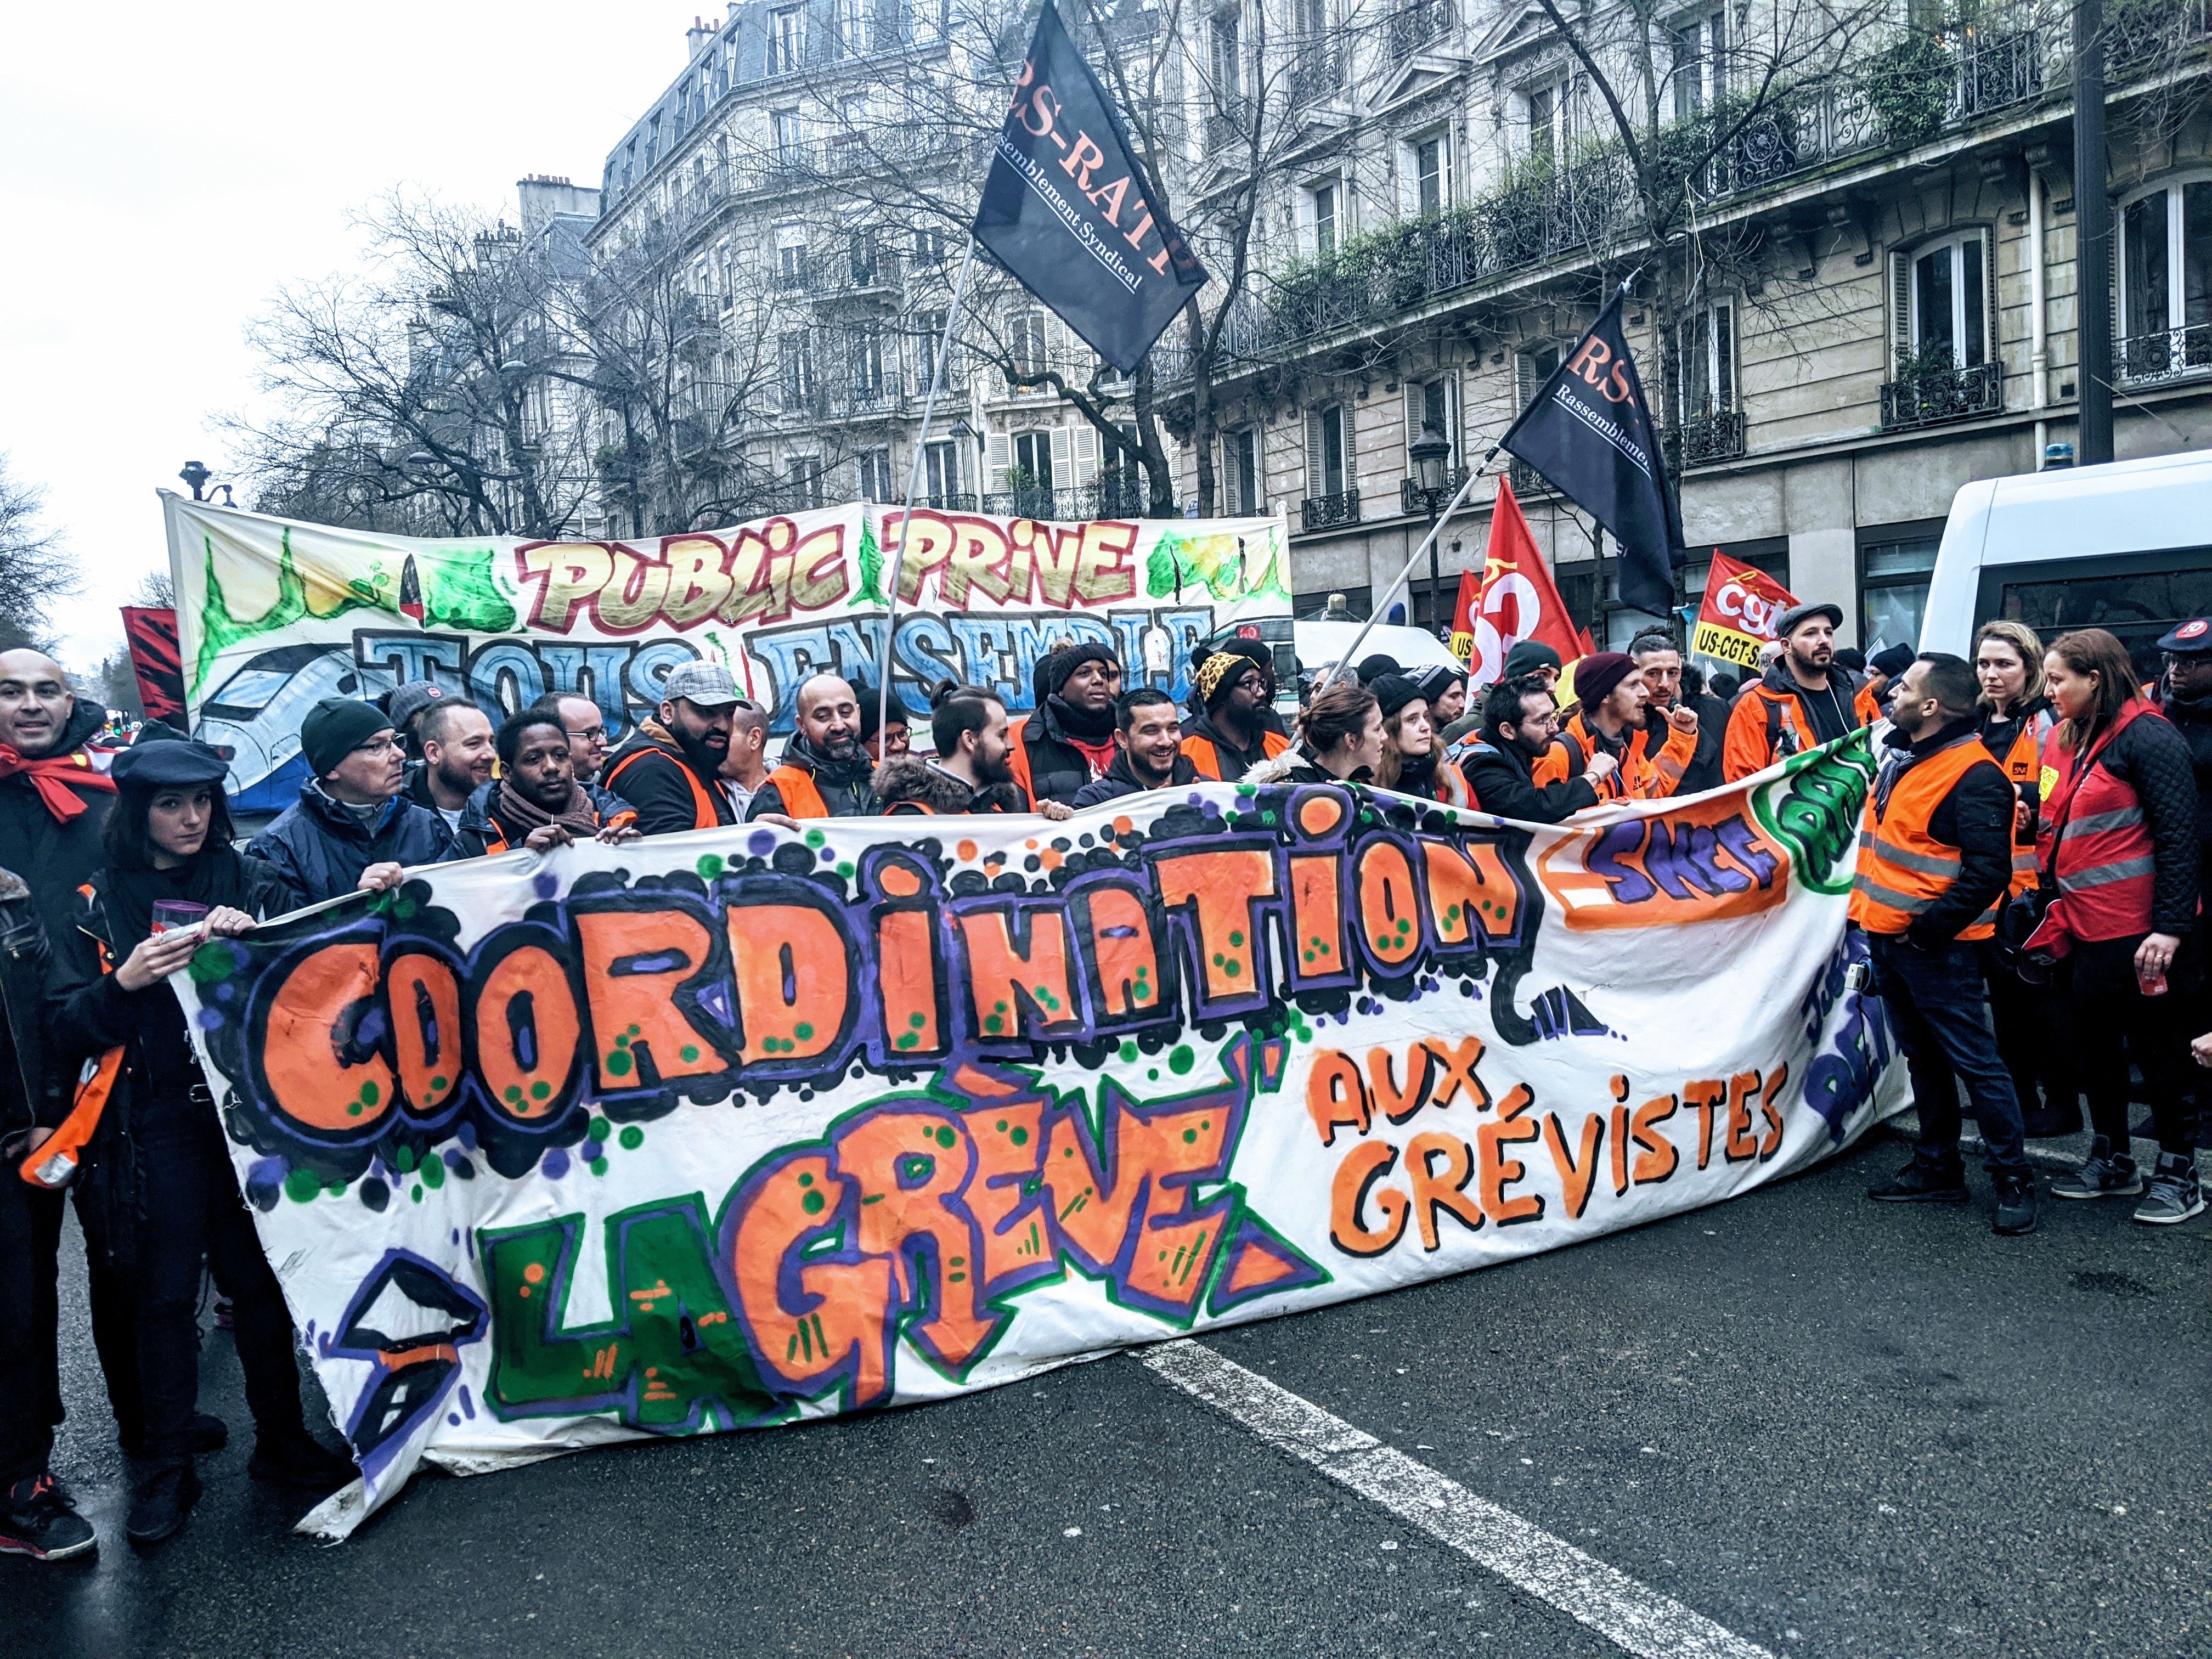 "La grève aux grévistes": the rank-and-file railworkers contingent marches behind their banner, "the strike to the strikers".